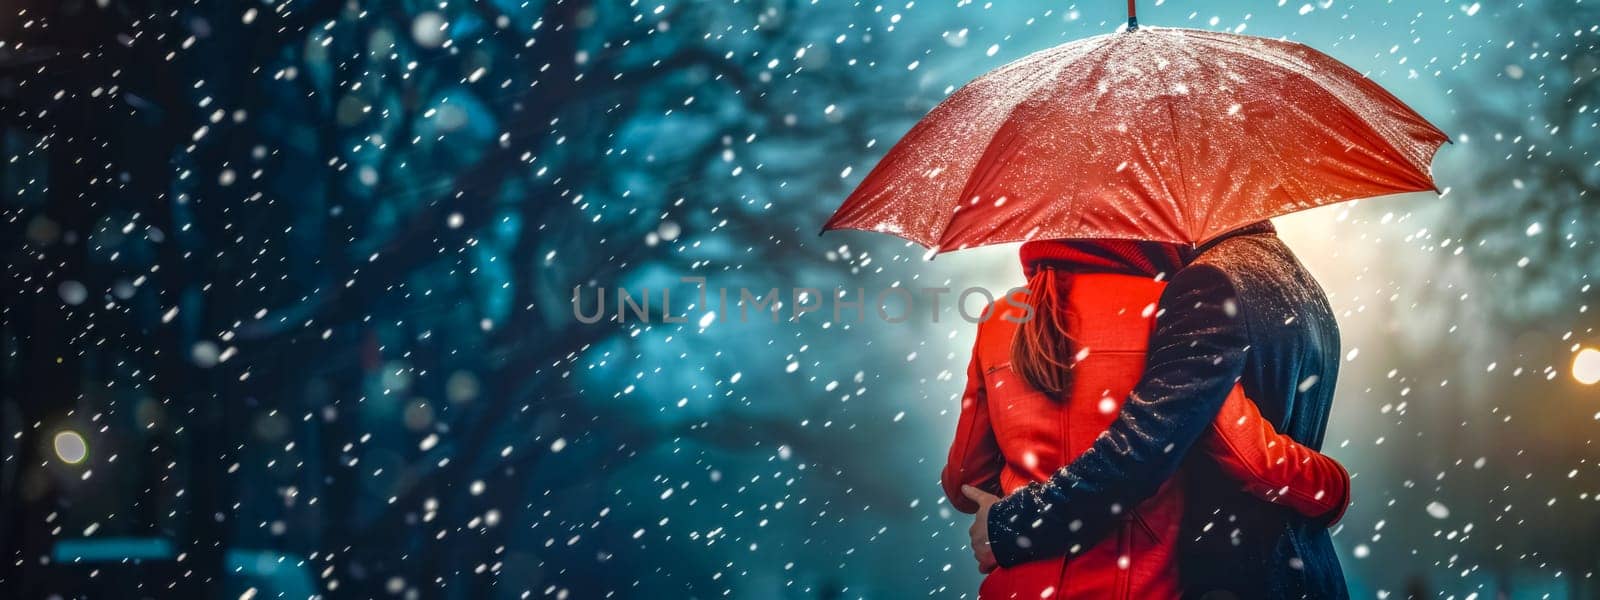 Couple hugging outdoor during a snowy night, covered by a red umbrella